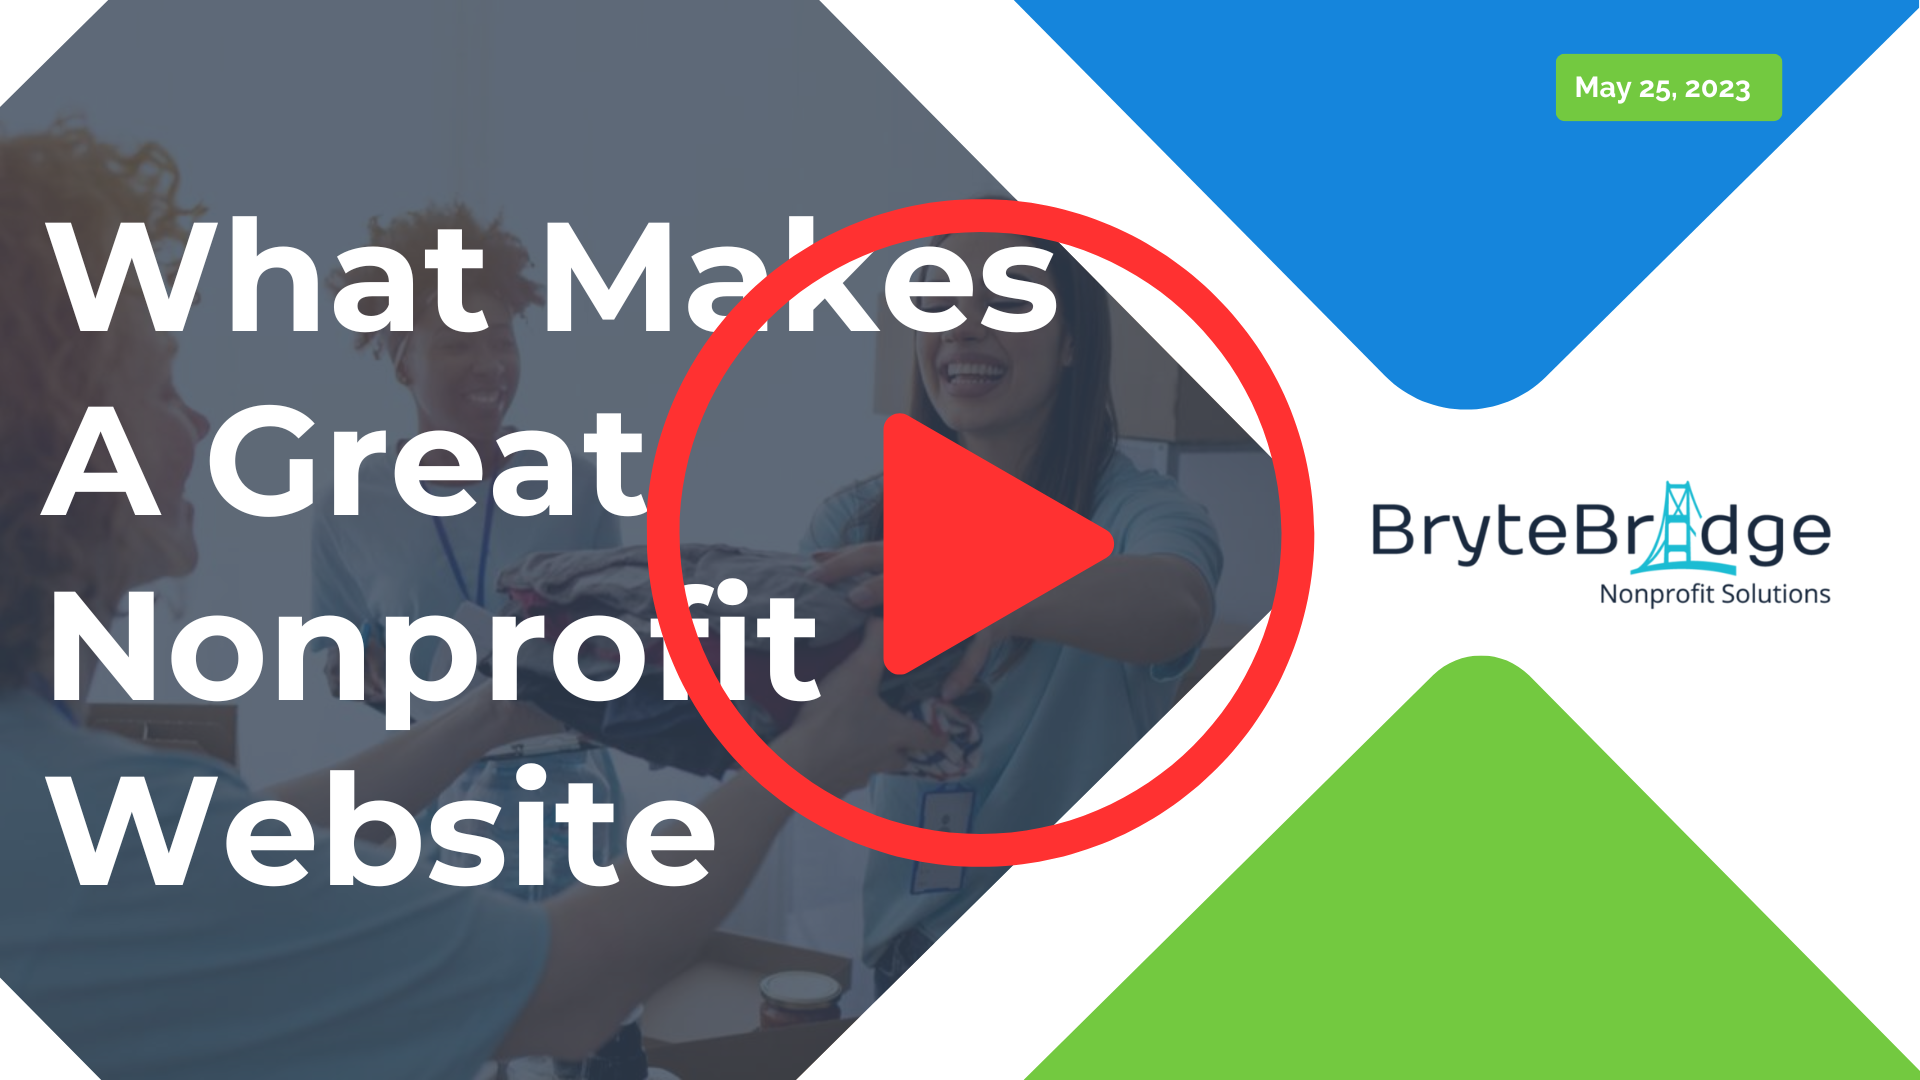 What makes a Great Nonprofit Website